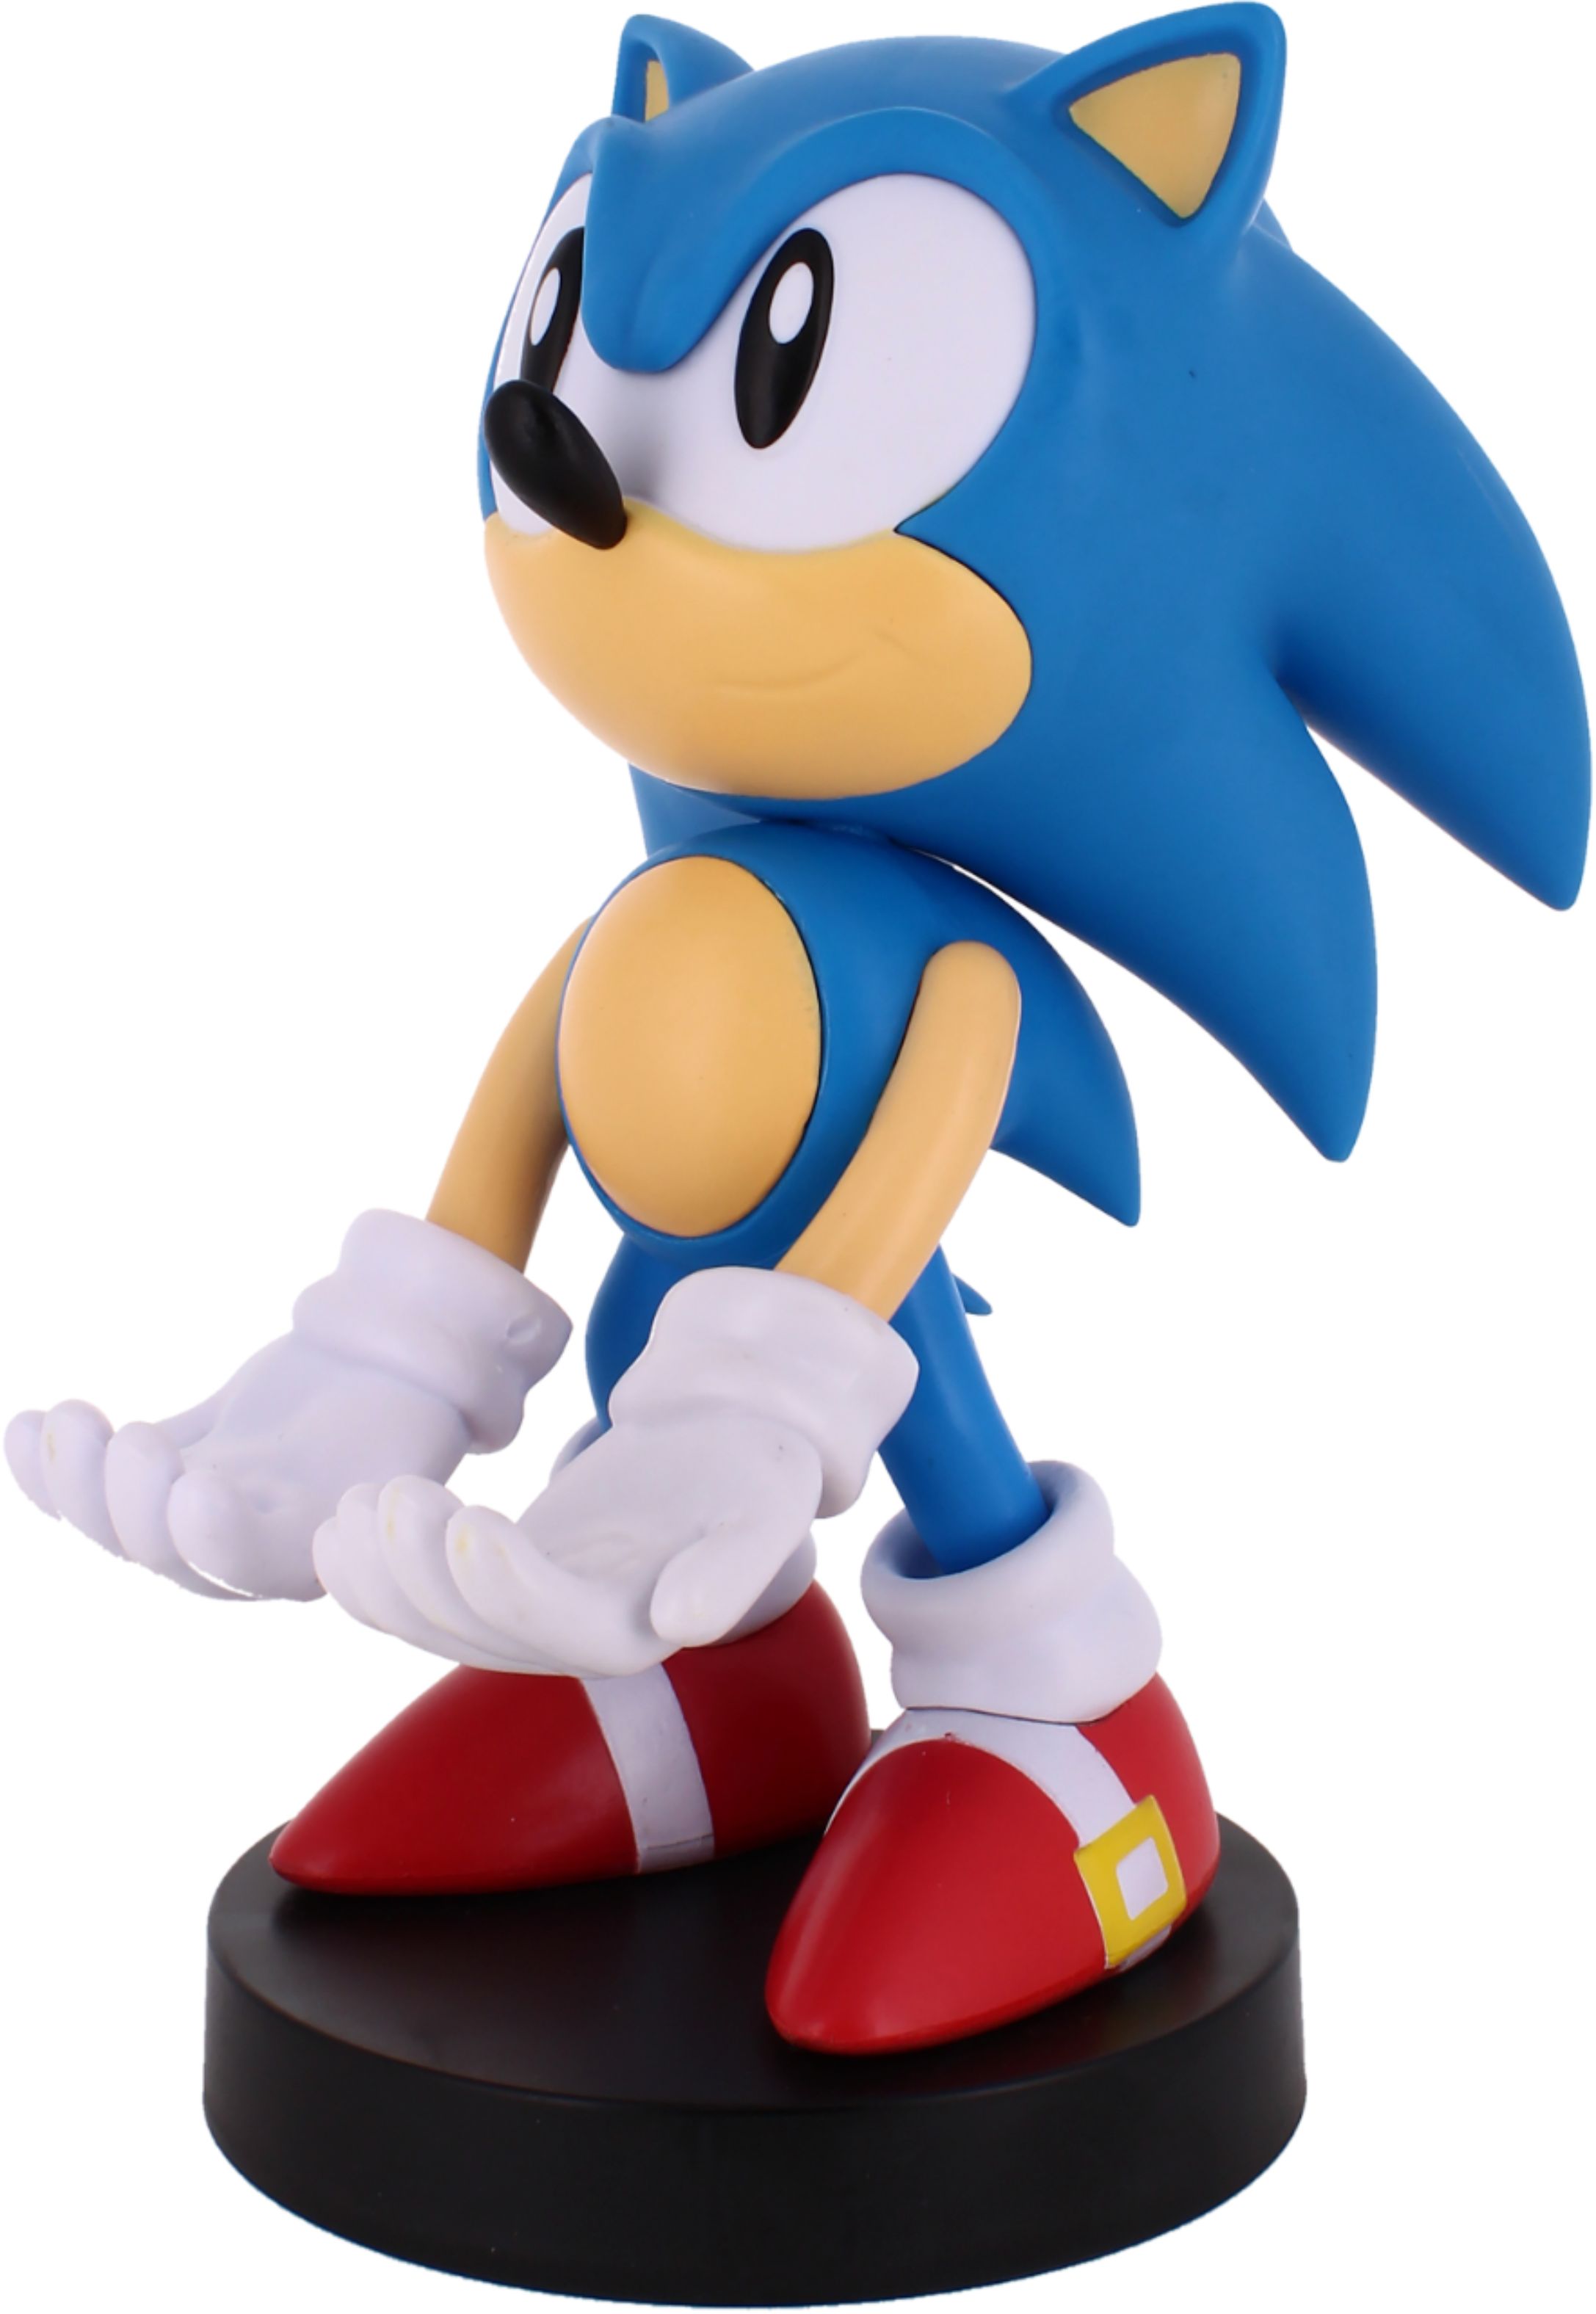 Cable Guy Sonic the Hedgehog 8-inch Phone and Controller Holder  CGCRSG300009 - Best Buy